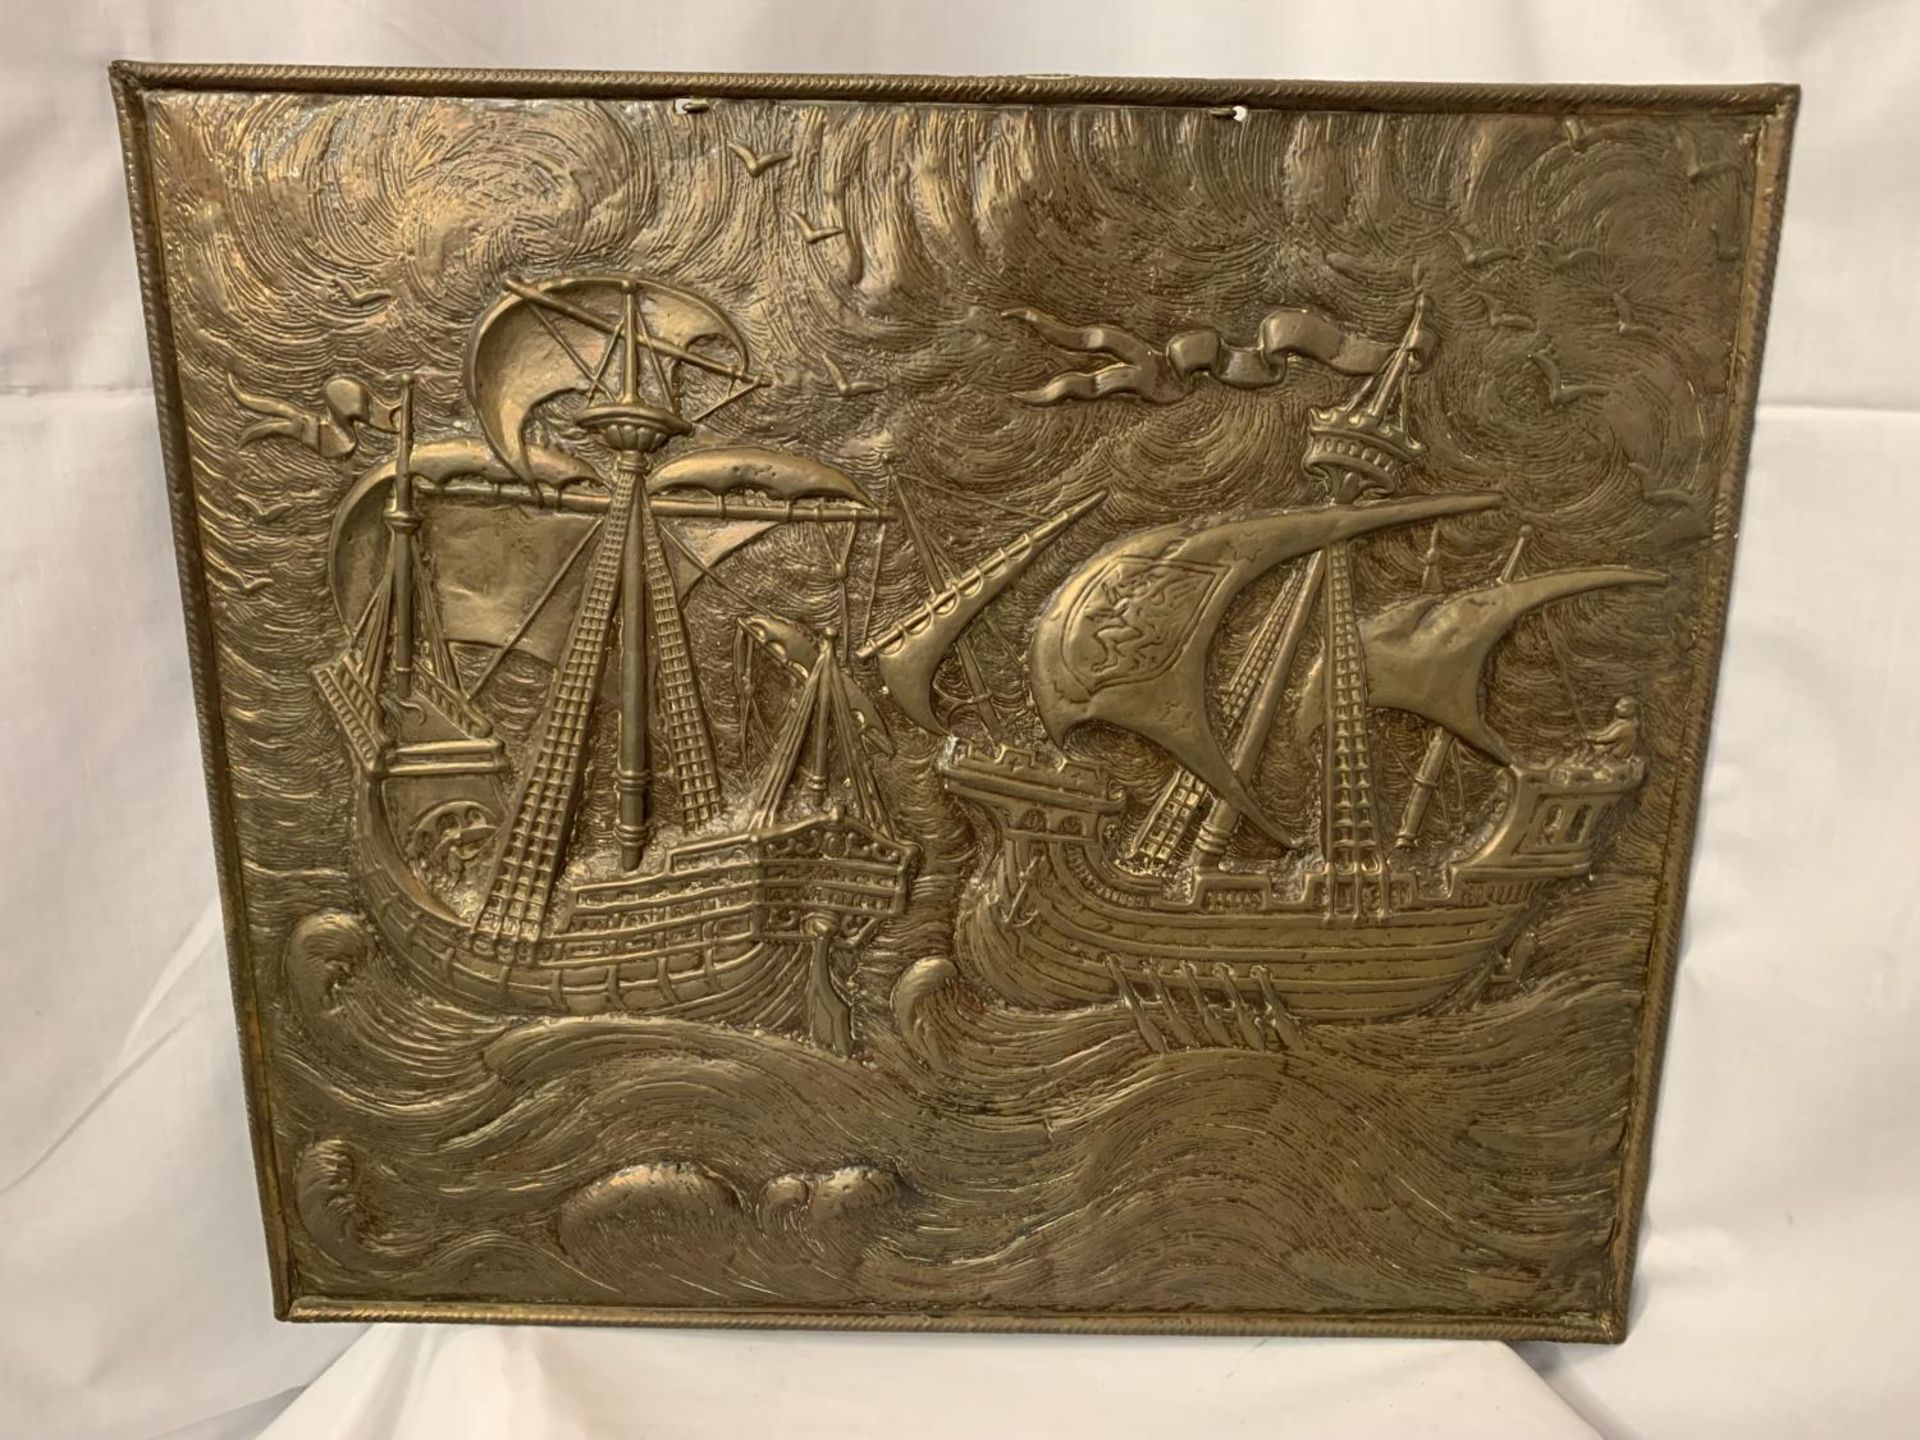 A LARGE BRASS WALL PLAQUE DEPICTING A SEA AND GALLEON SCENE 67CM X 58CM - Image 3 of 3